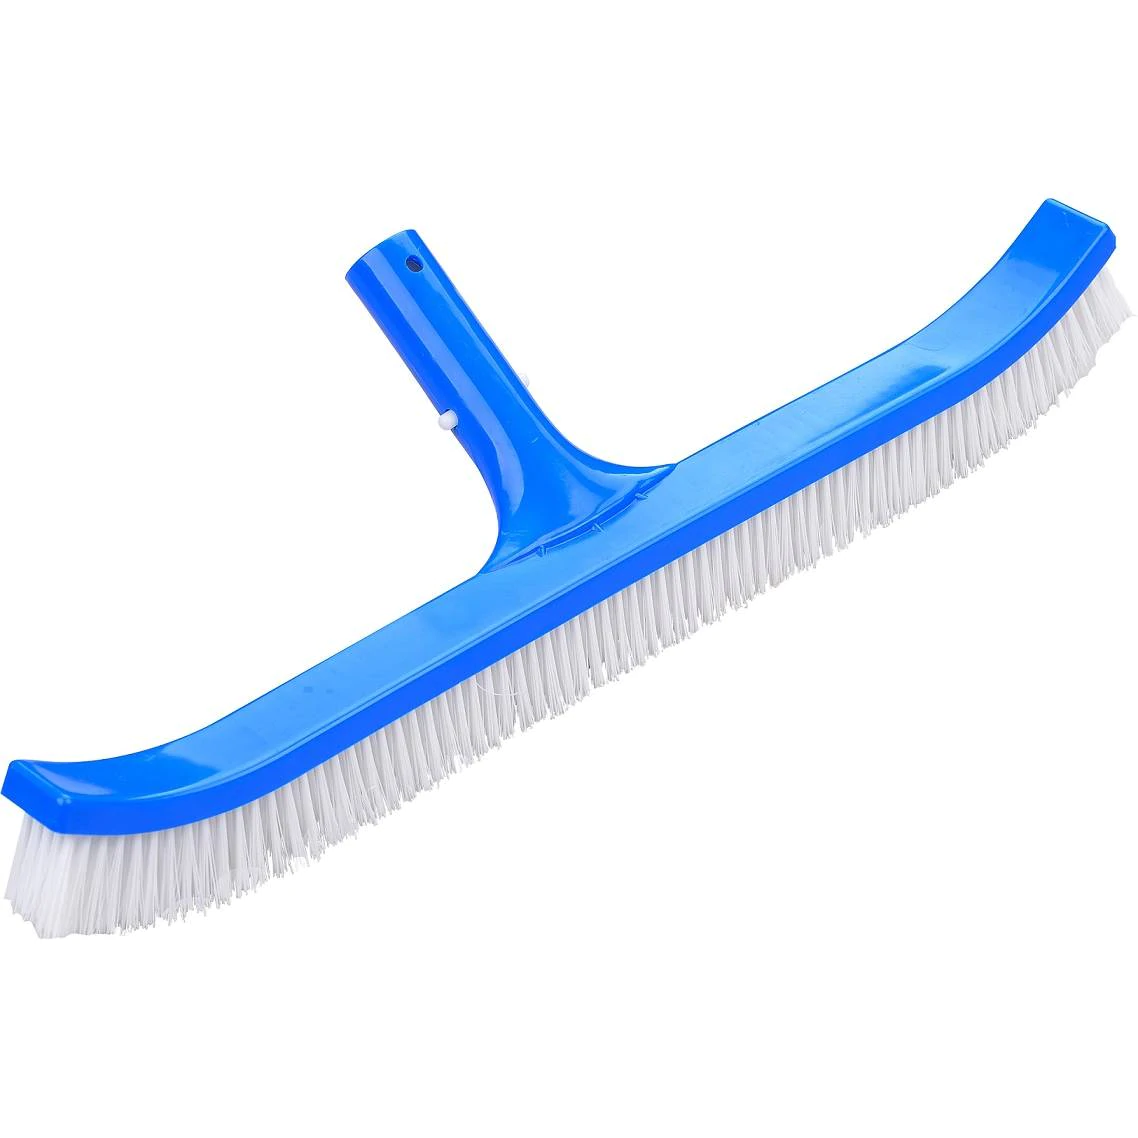 Blue Wave Curved 18" Pool Brush for Walls and Floors with Nylon Fiber Bristles